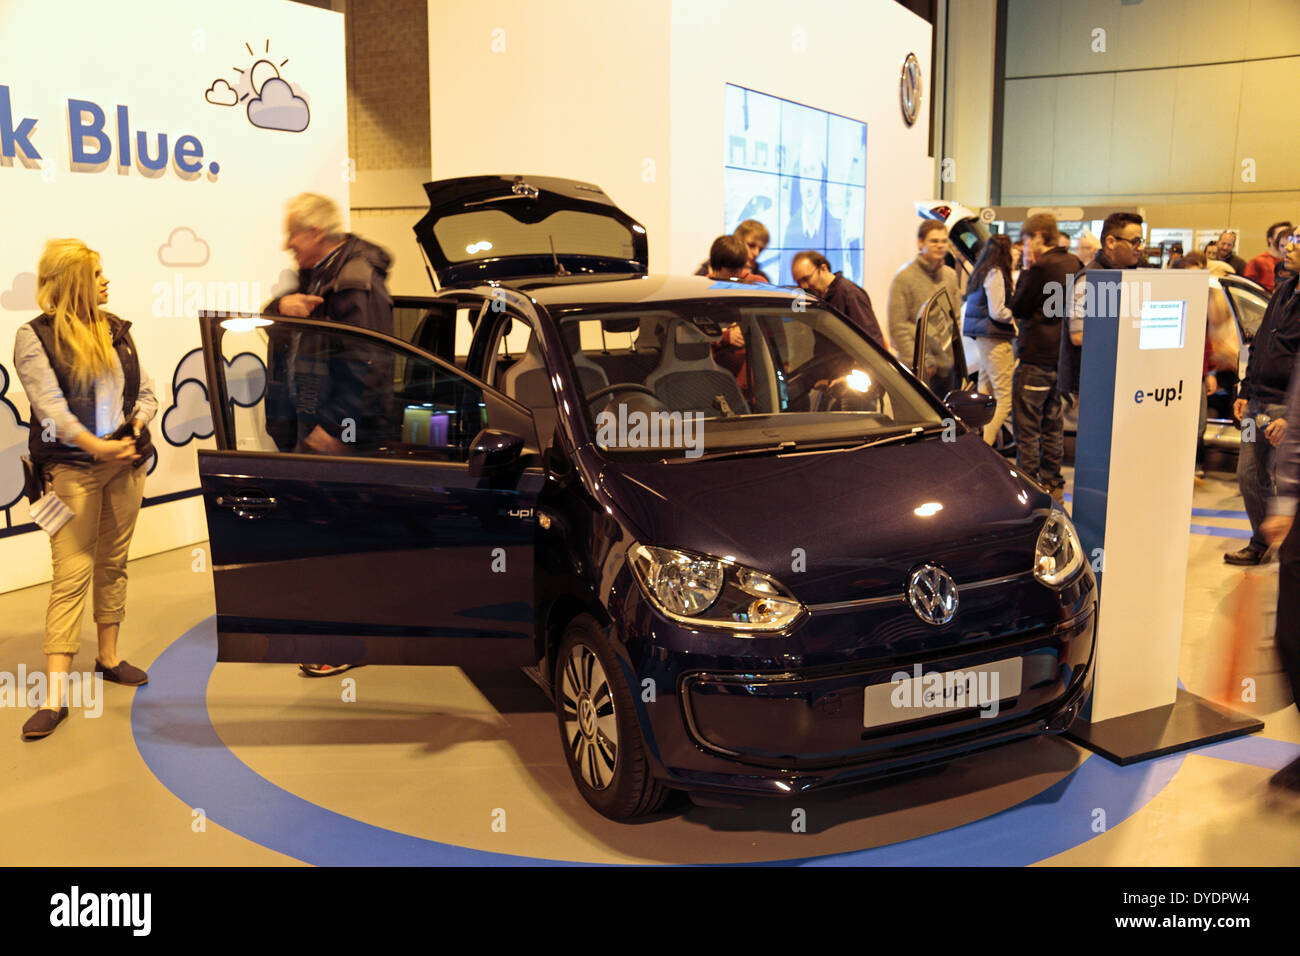 Volkswagen 'e-up!' electric city car at the Gadget Show Live 2014 show at the NEC, near Birmingham, UK. Stock Photo